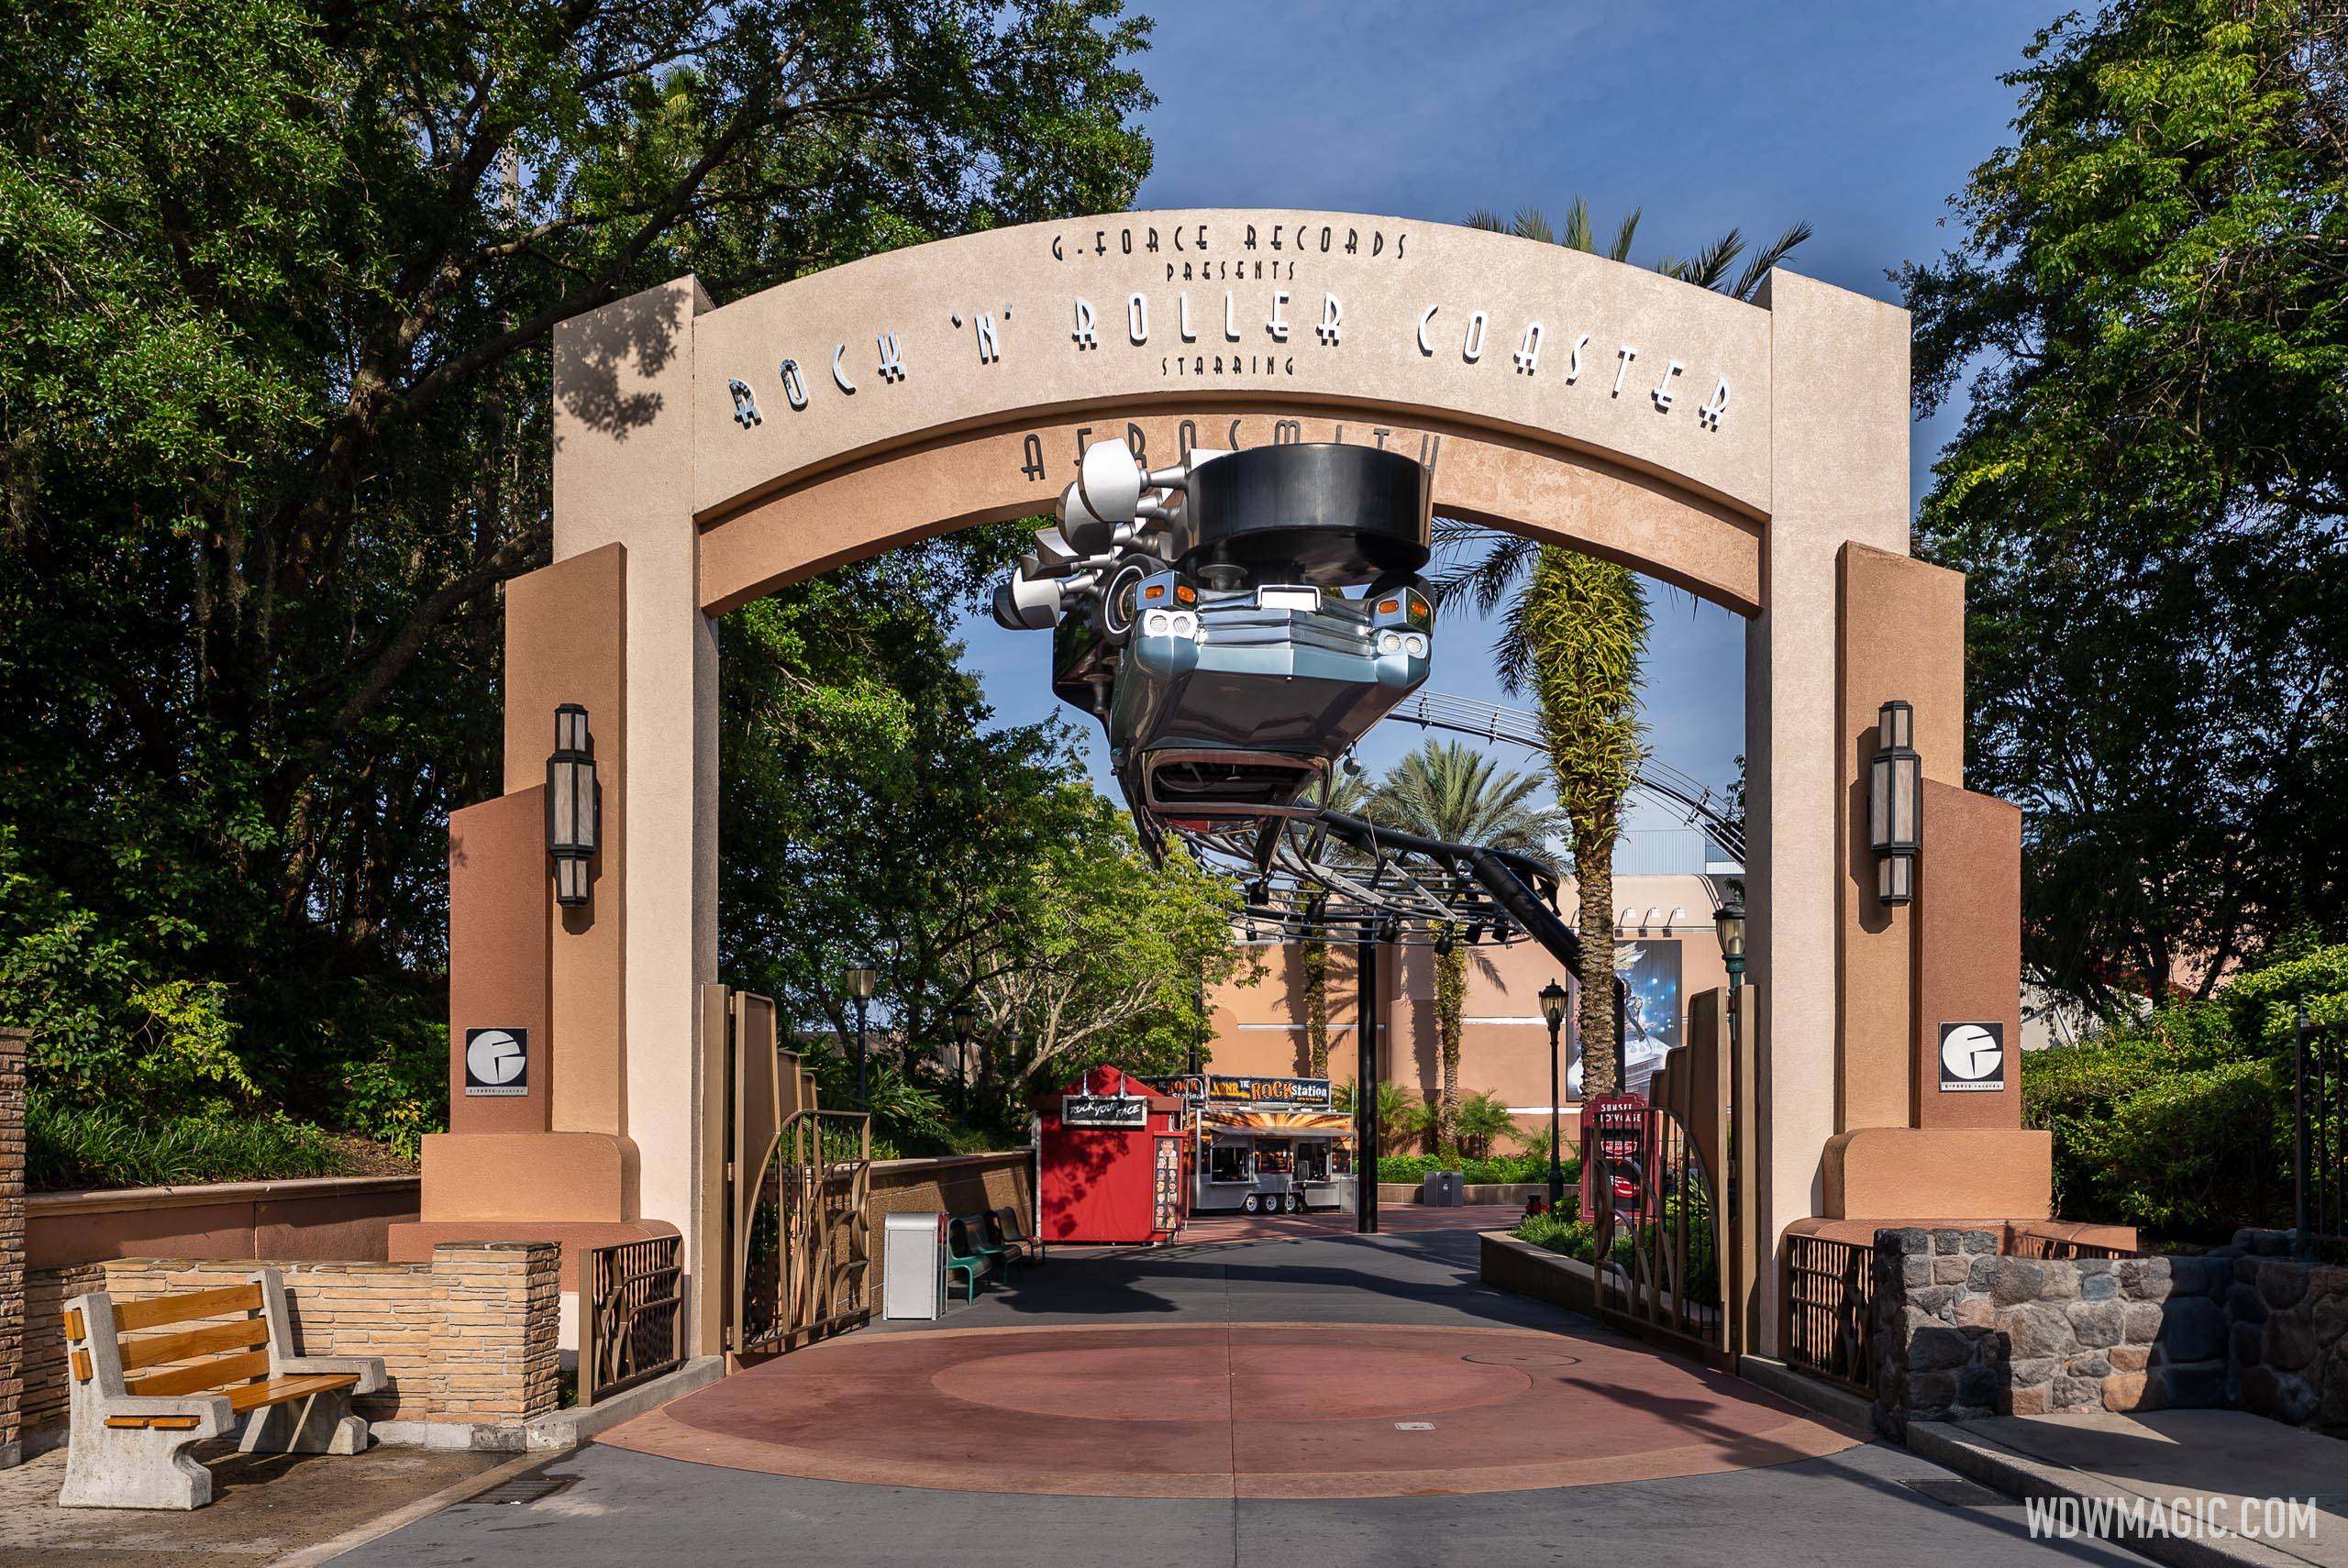 Walt Disney World's Rock 'n' Roller Coaster closes again for refurbishment  after briefly reopening over Memorial Day Weekend